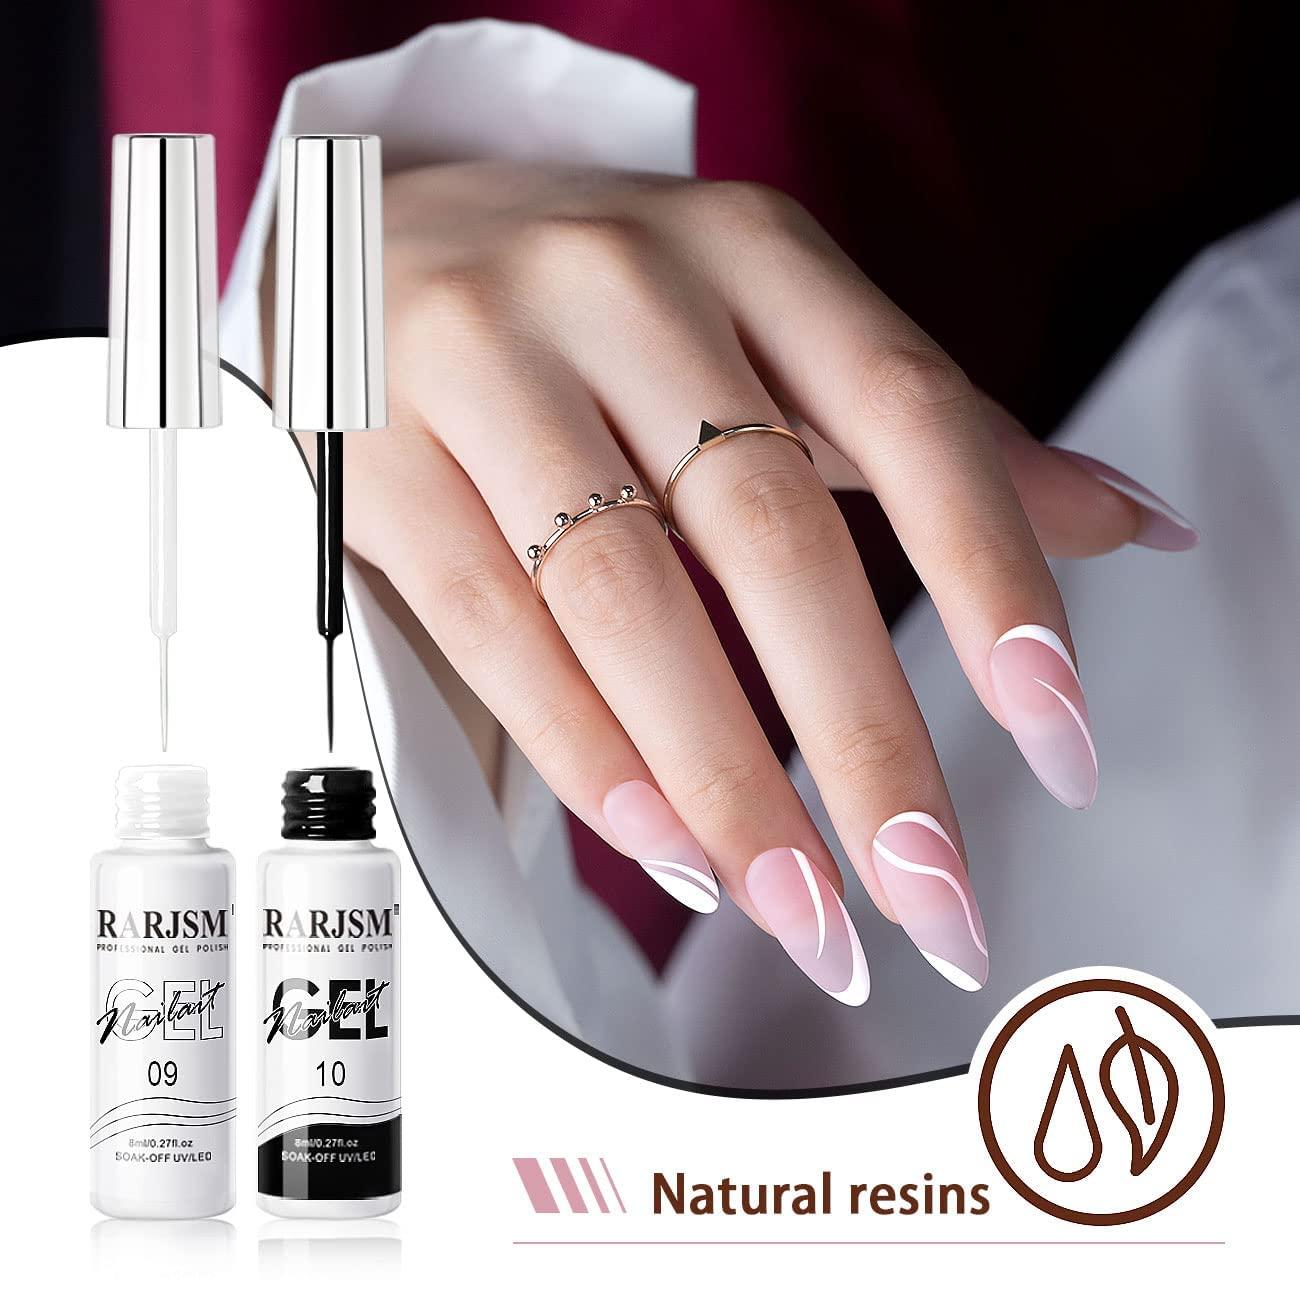 RARJSM Nail Art Gel,Liner Gel Polish,Black White Nail Design Polish Painted Gel  Nail Polish Set 2Pcs Soak off Curing Requires 8ml Build in Thin Brush for  Home Salon Diy Nail French Manicure